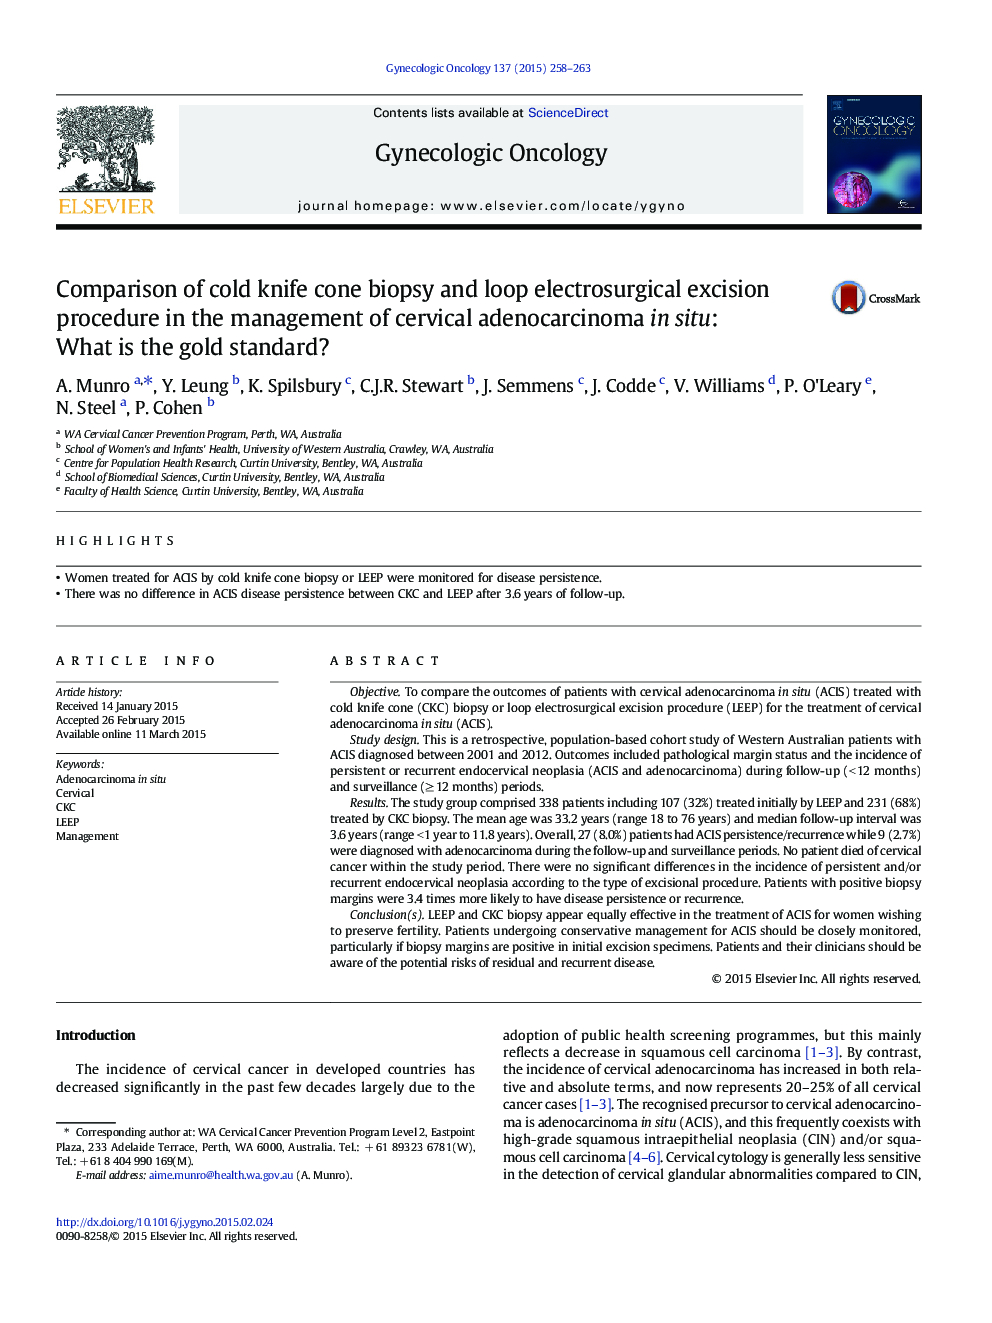 Comparison of cold knife cone biopsy and loop electrosurgical excision procedure in the management of cervical adenocarcinoma in situ: What is the gold standard?